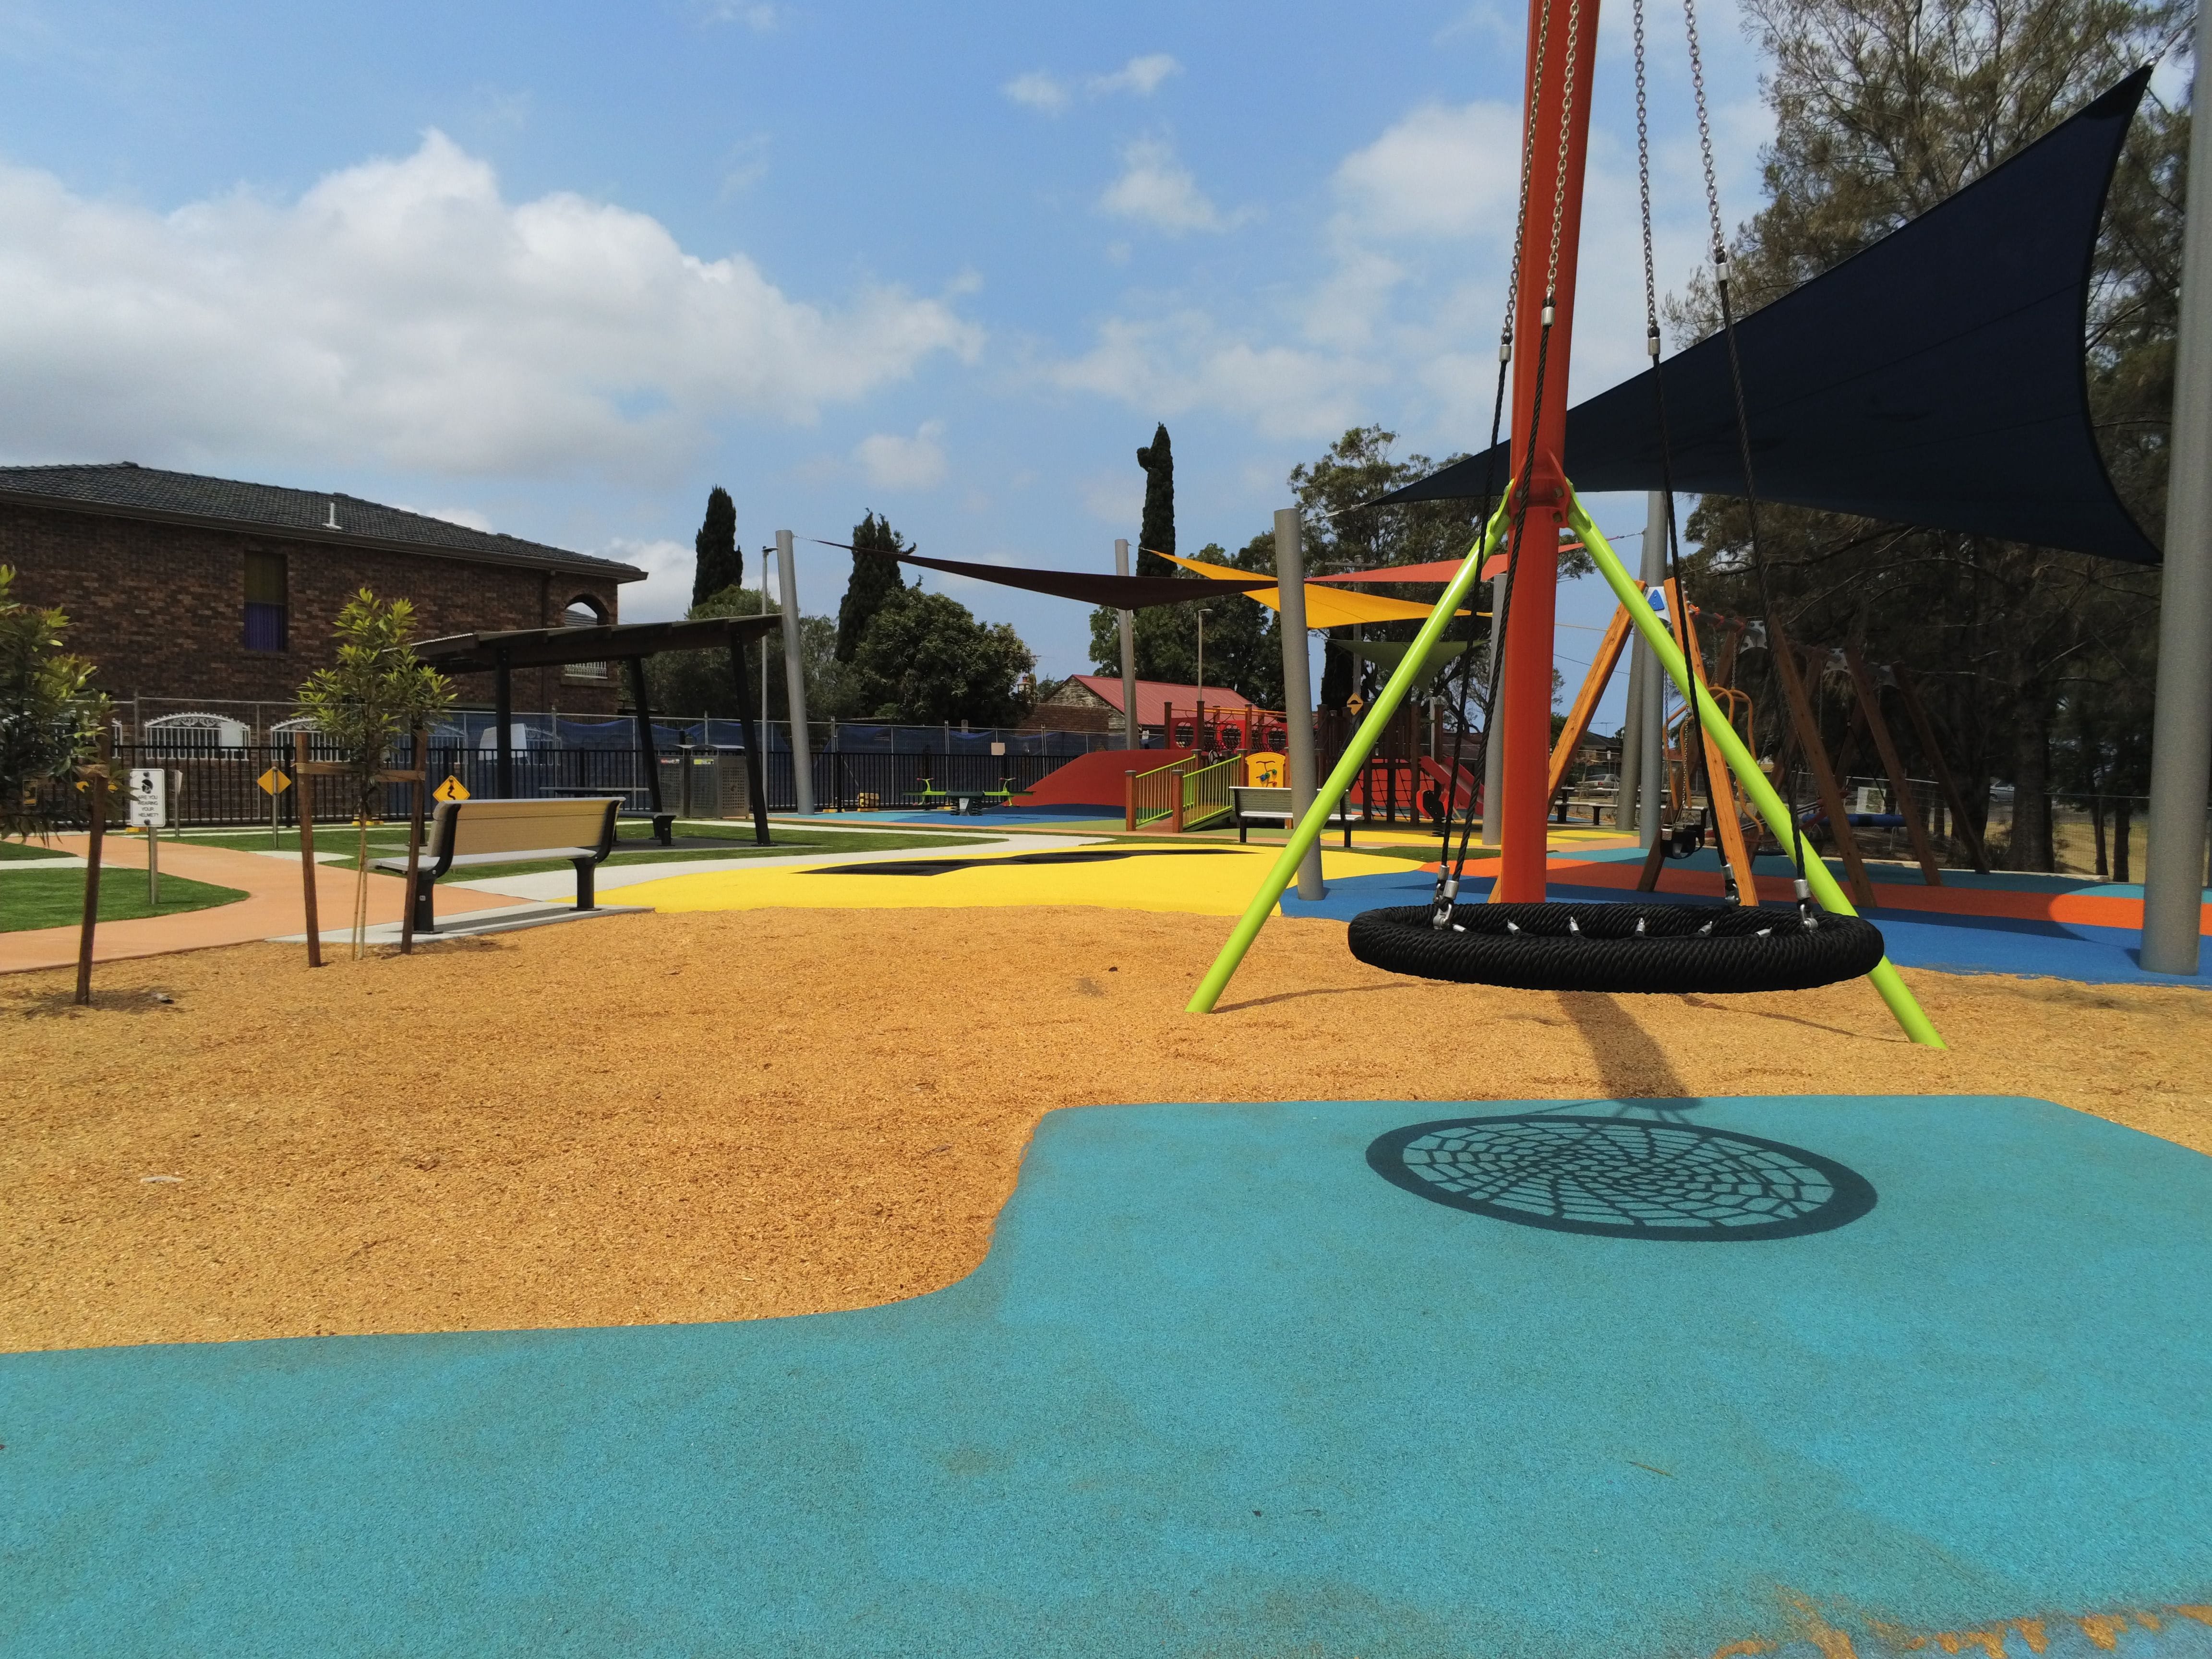 Australian Sports & Safety Surfaces - Inclusive Adventure Playground and Bike Training Circuit at Kempt Field Image -5df9791560a6a